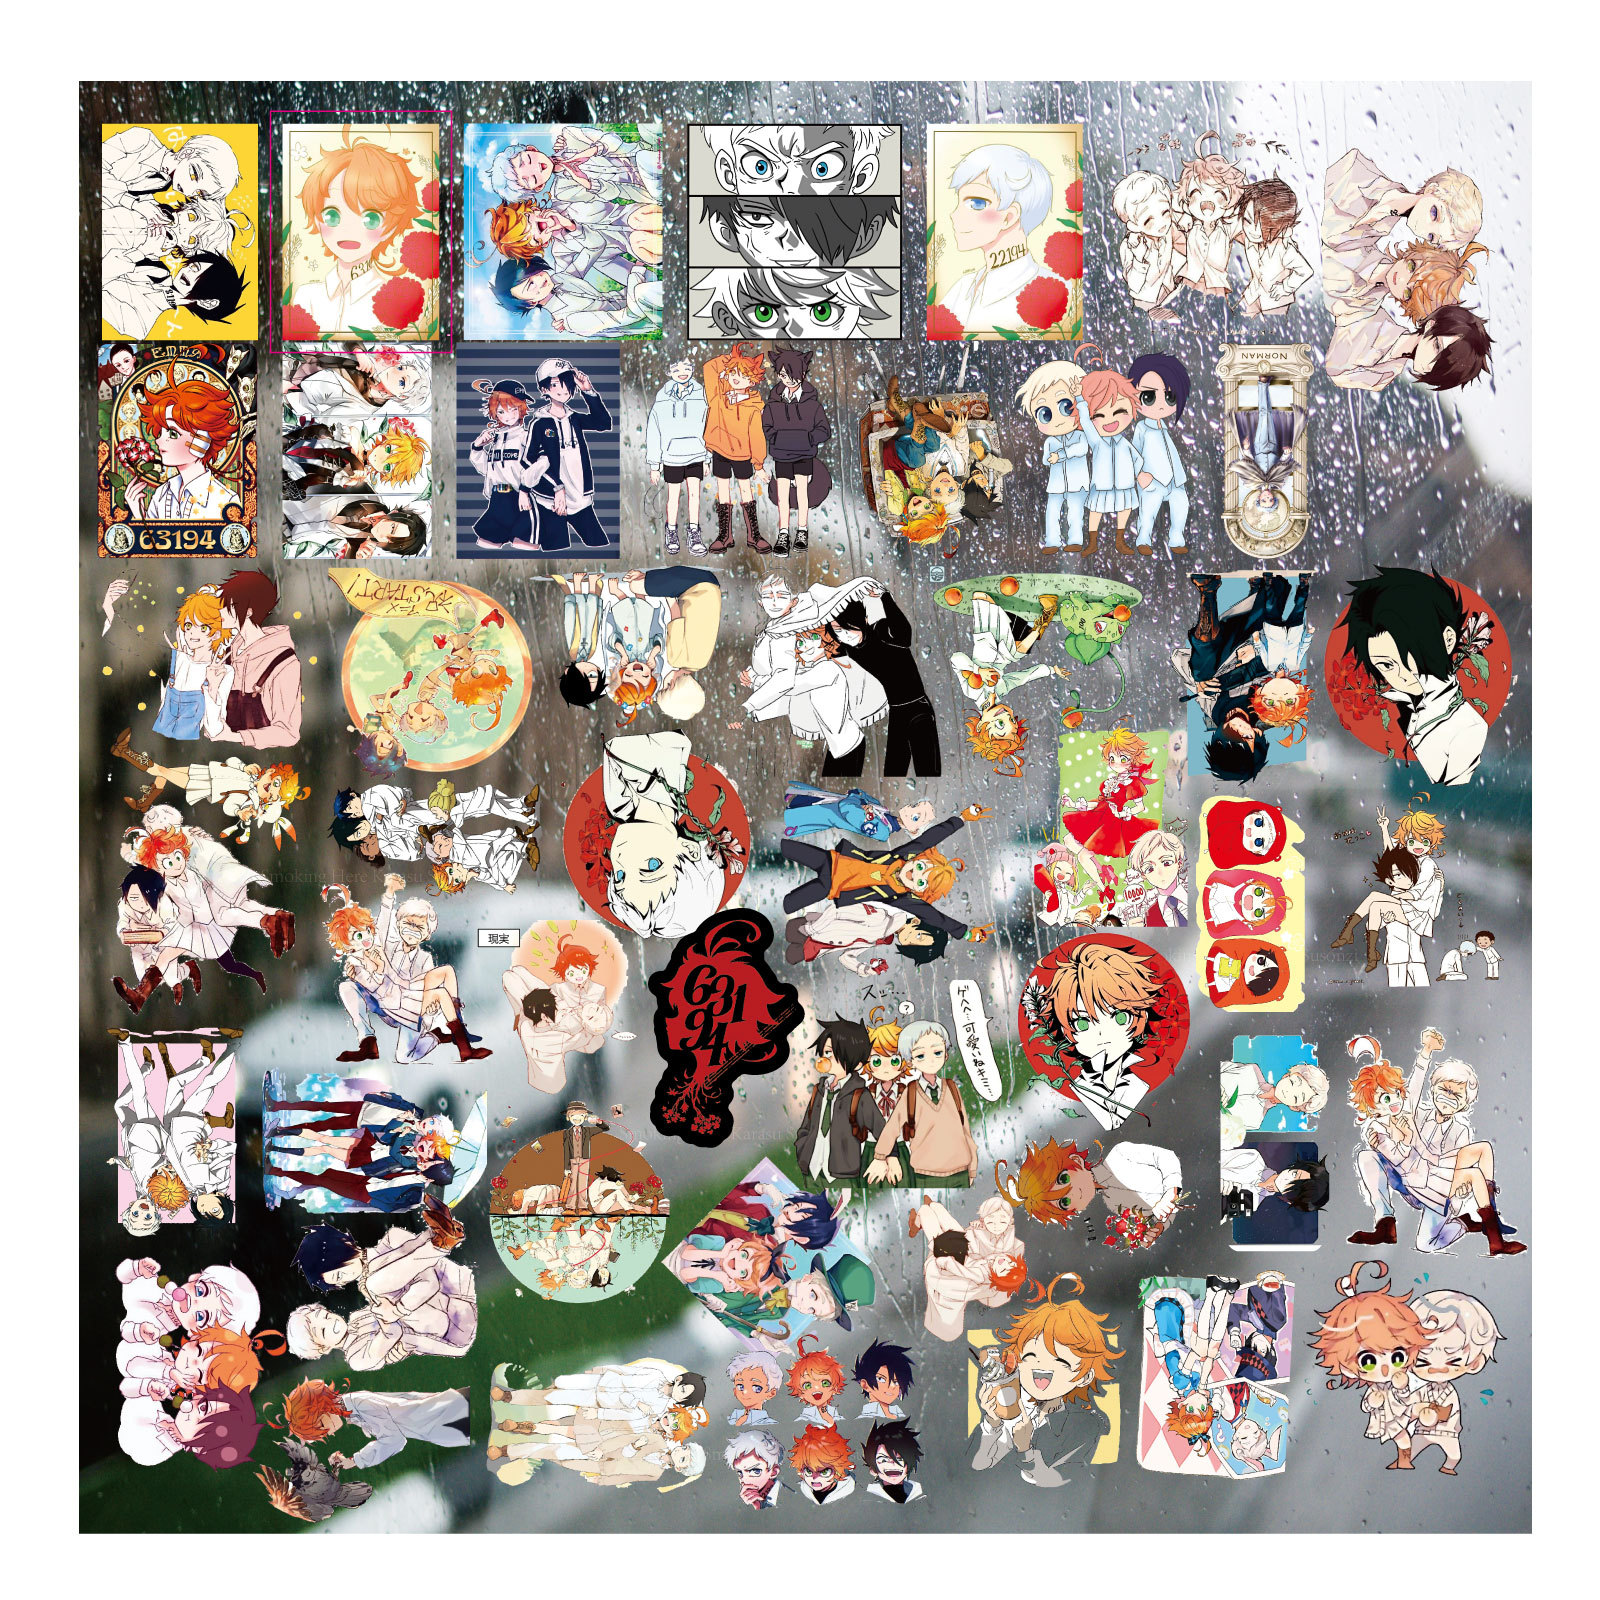 The Promised Neverland anime  3D sticker price for a set of 40-52pcs